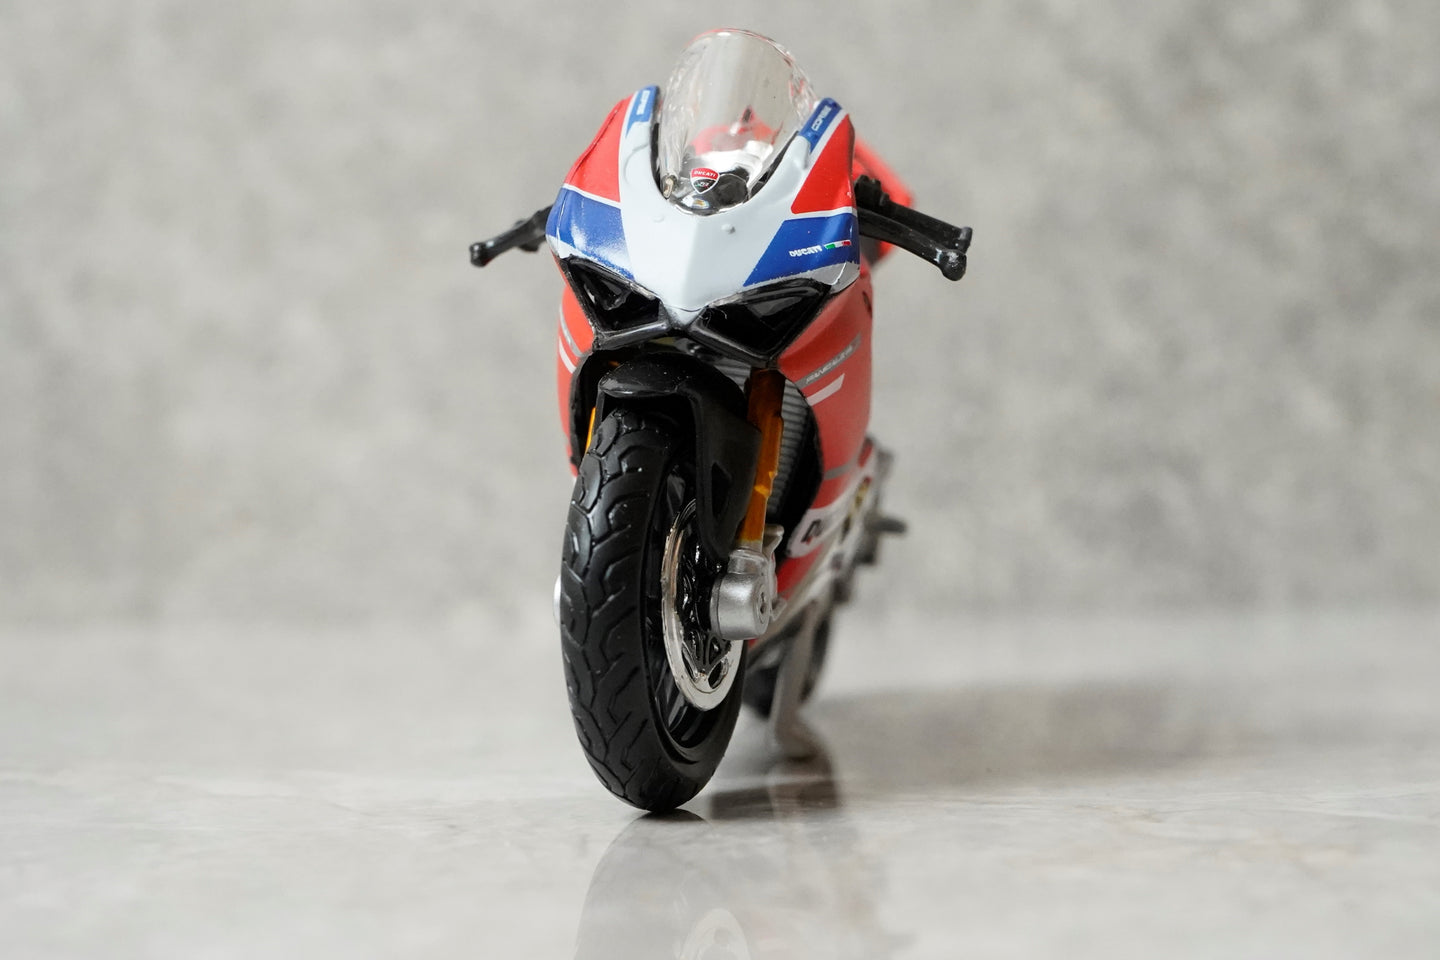 Ducati Panigale V4 S Corse Diecast Bike 1:18 Motorcycle Model By Maisto